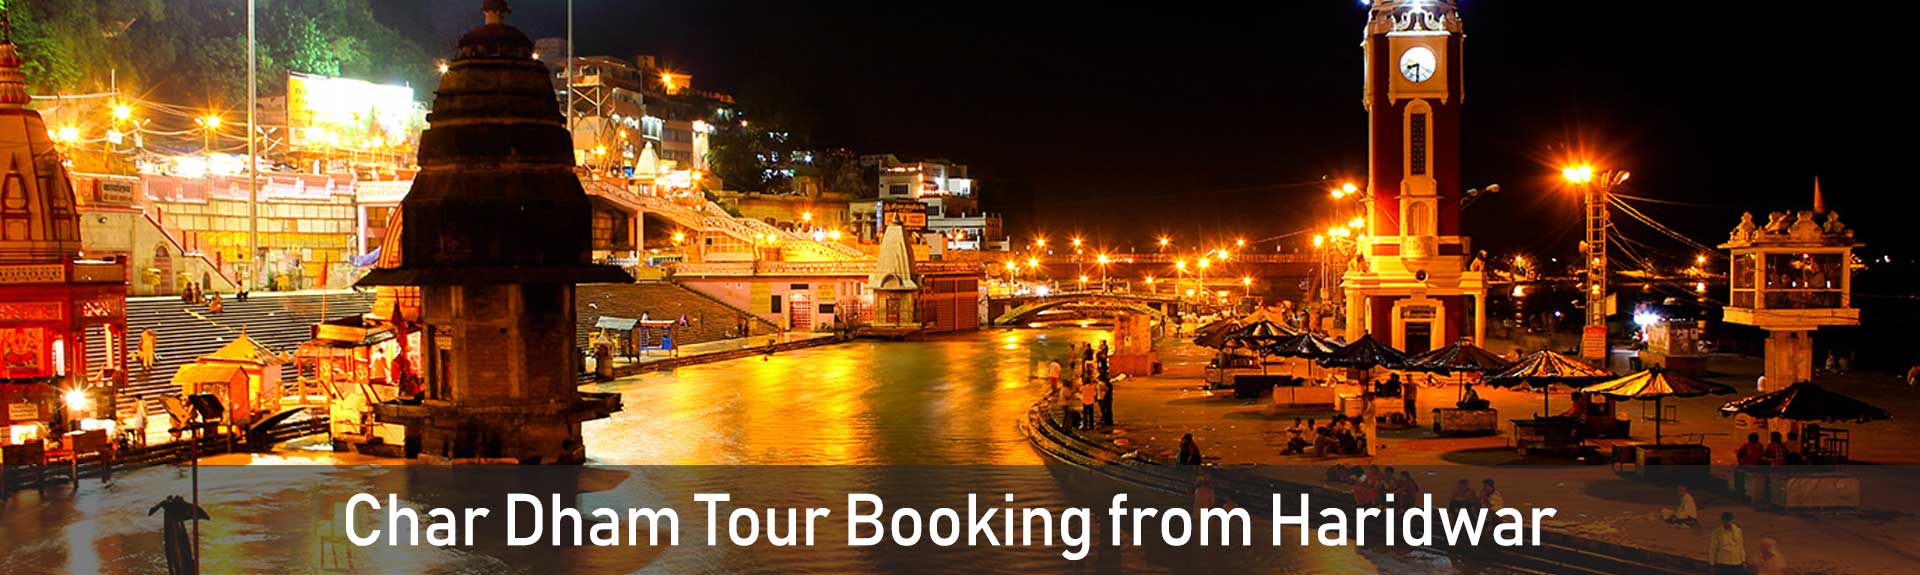 Char Dham Tour Booking from Haridwar